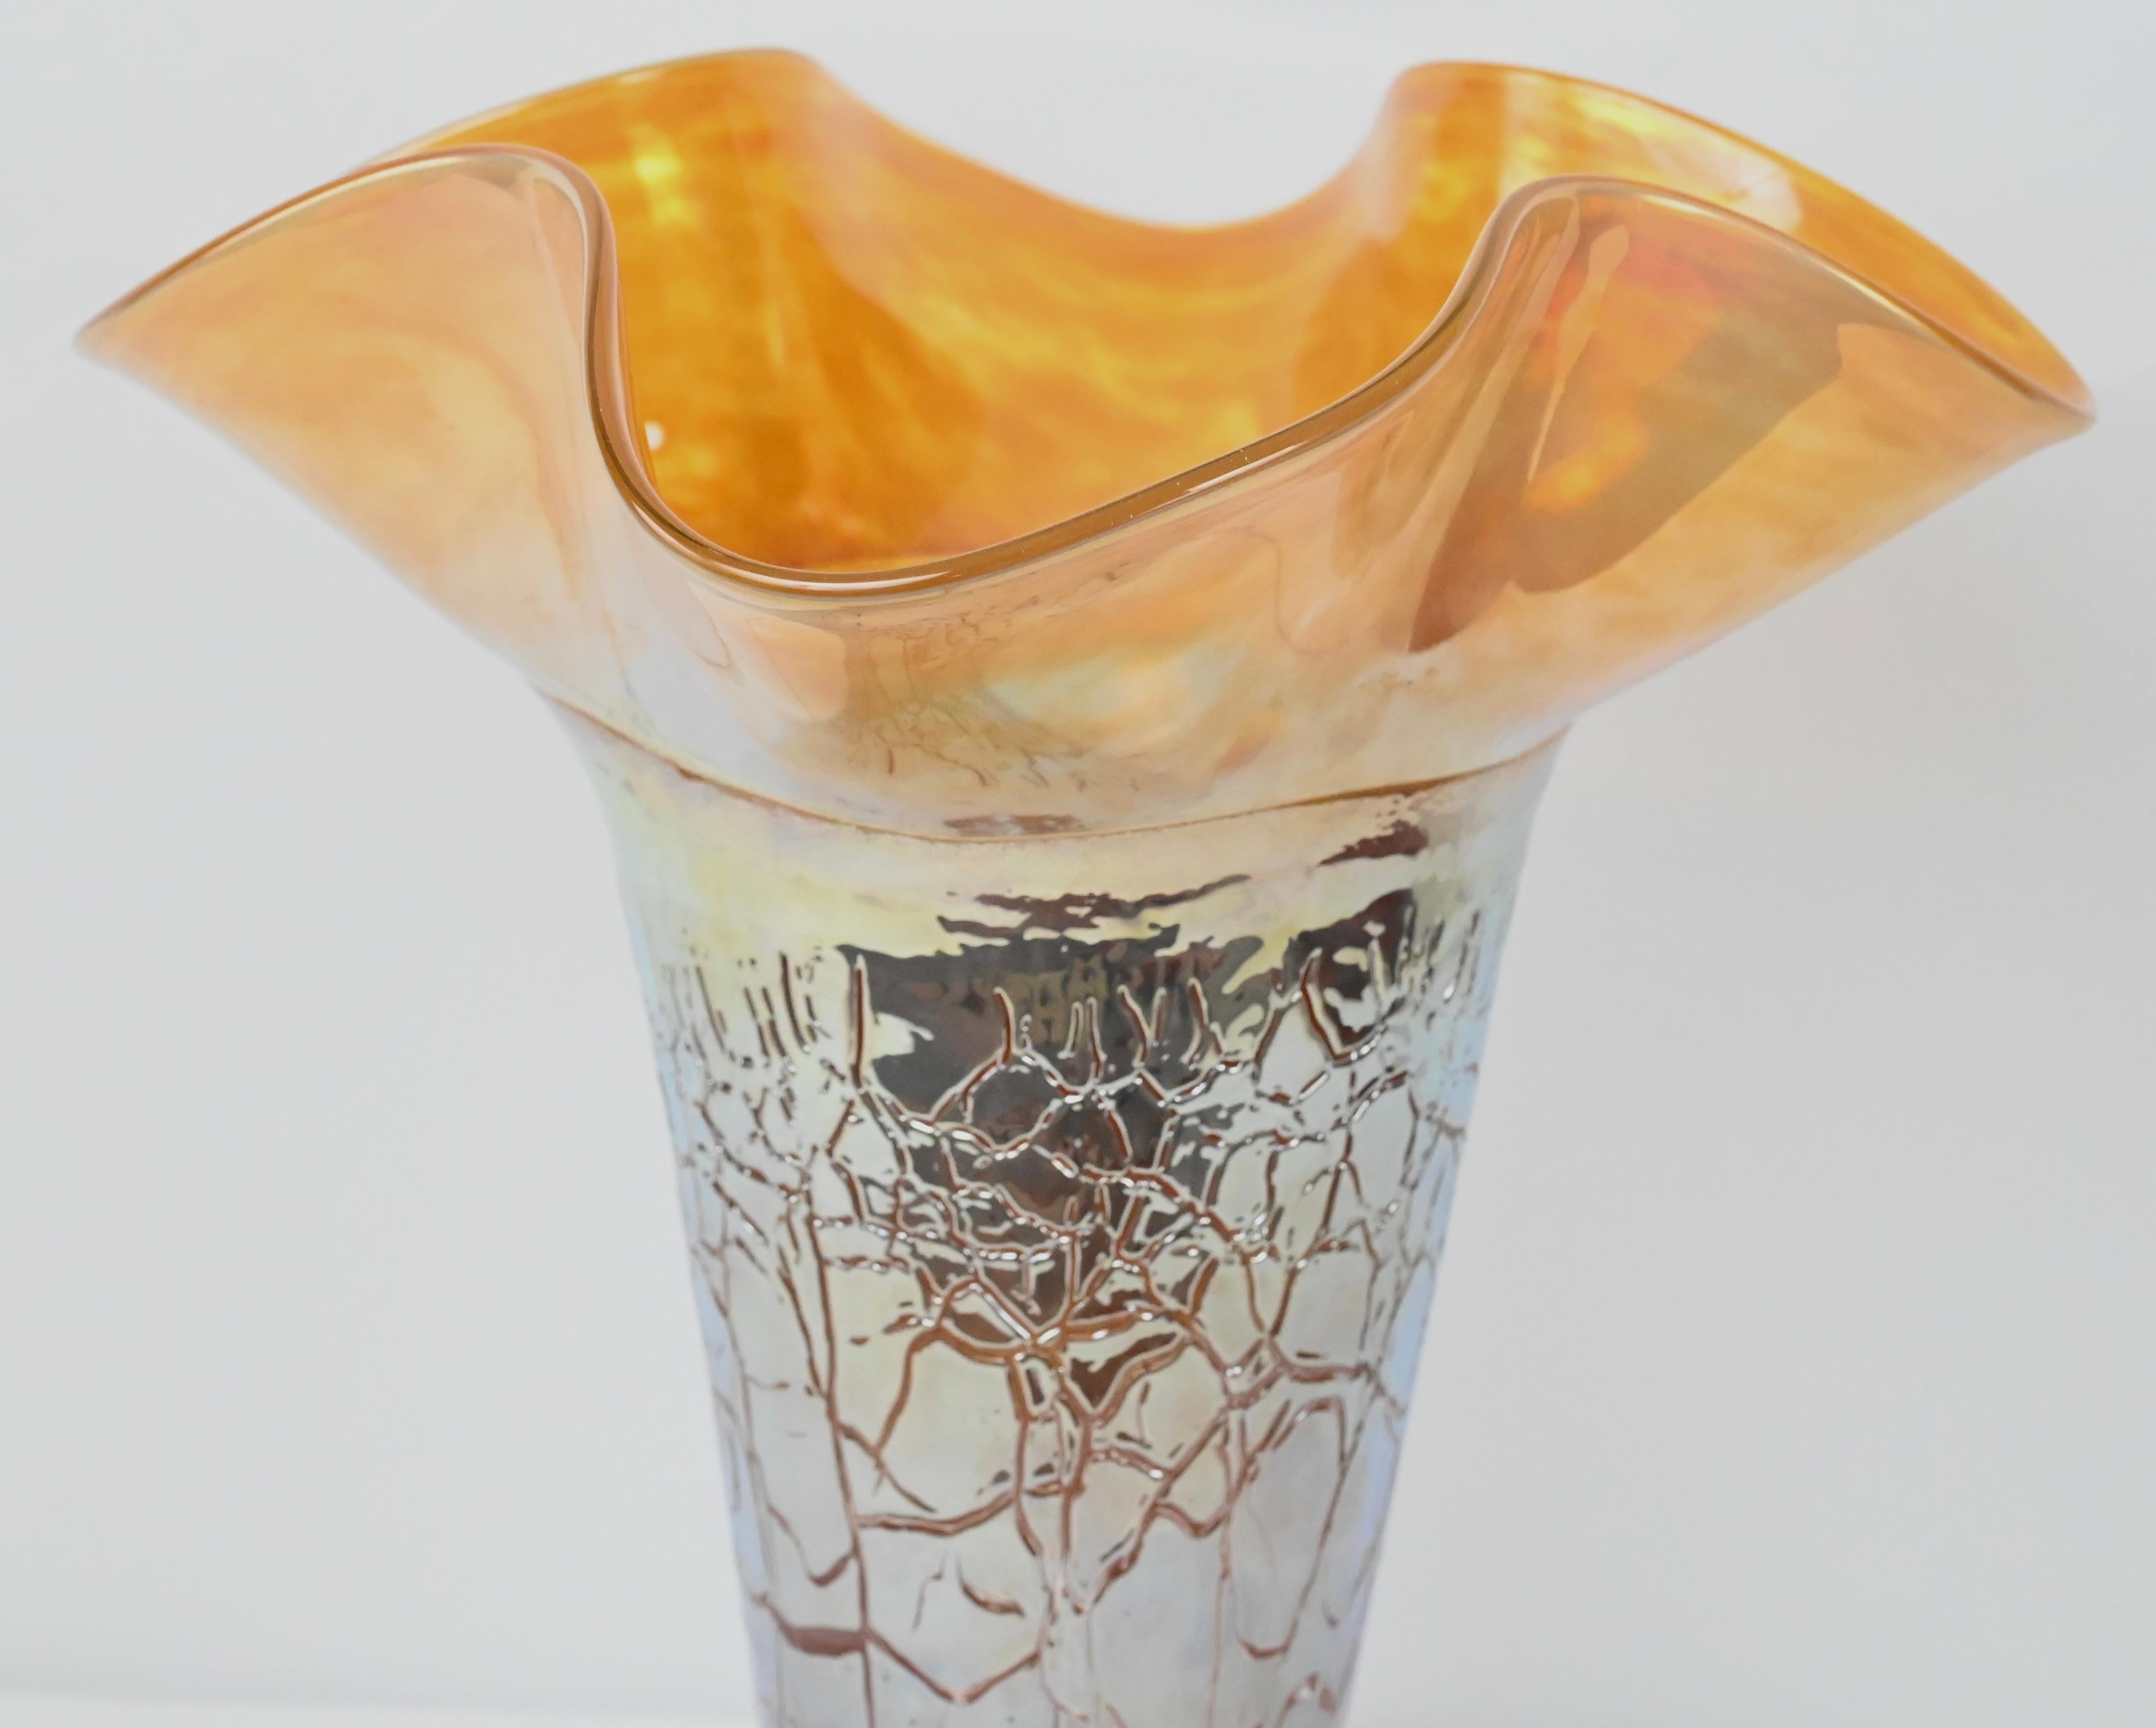 A fine quality Fenton Hollywood Regency style art glass vase. 
Amazing depth to the piece and wonderful neutral colors. 

This Fenton Hollywood Regency style art glass vase would enhance any shelf, table top or counter. Perfect for a contemporary